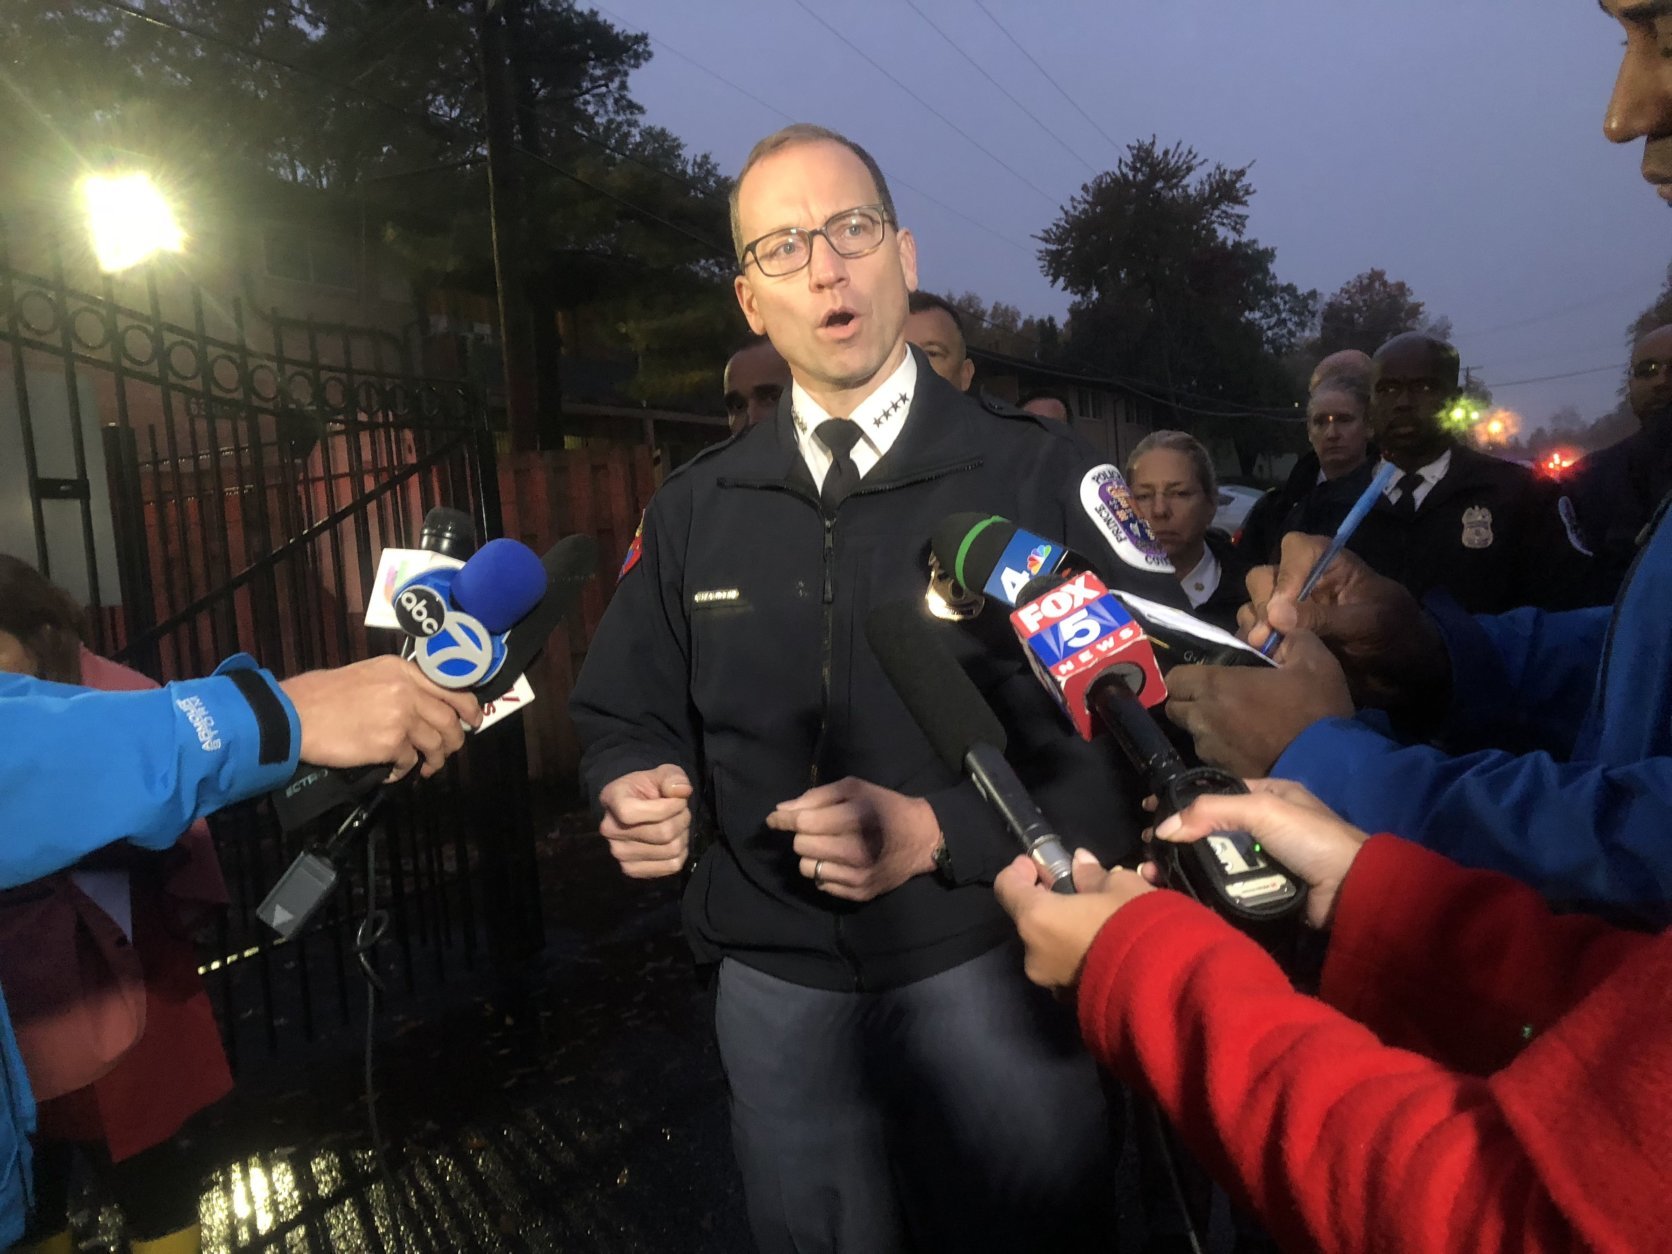 A preliminary investigation indicates about 10 shots were exchanged between the officers and the suspect, Chief Hank Stawinski said. (WTOP/Mike Murillo)